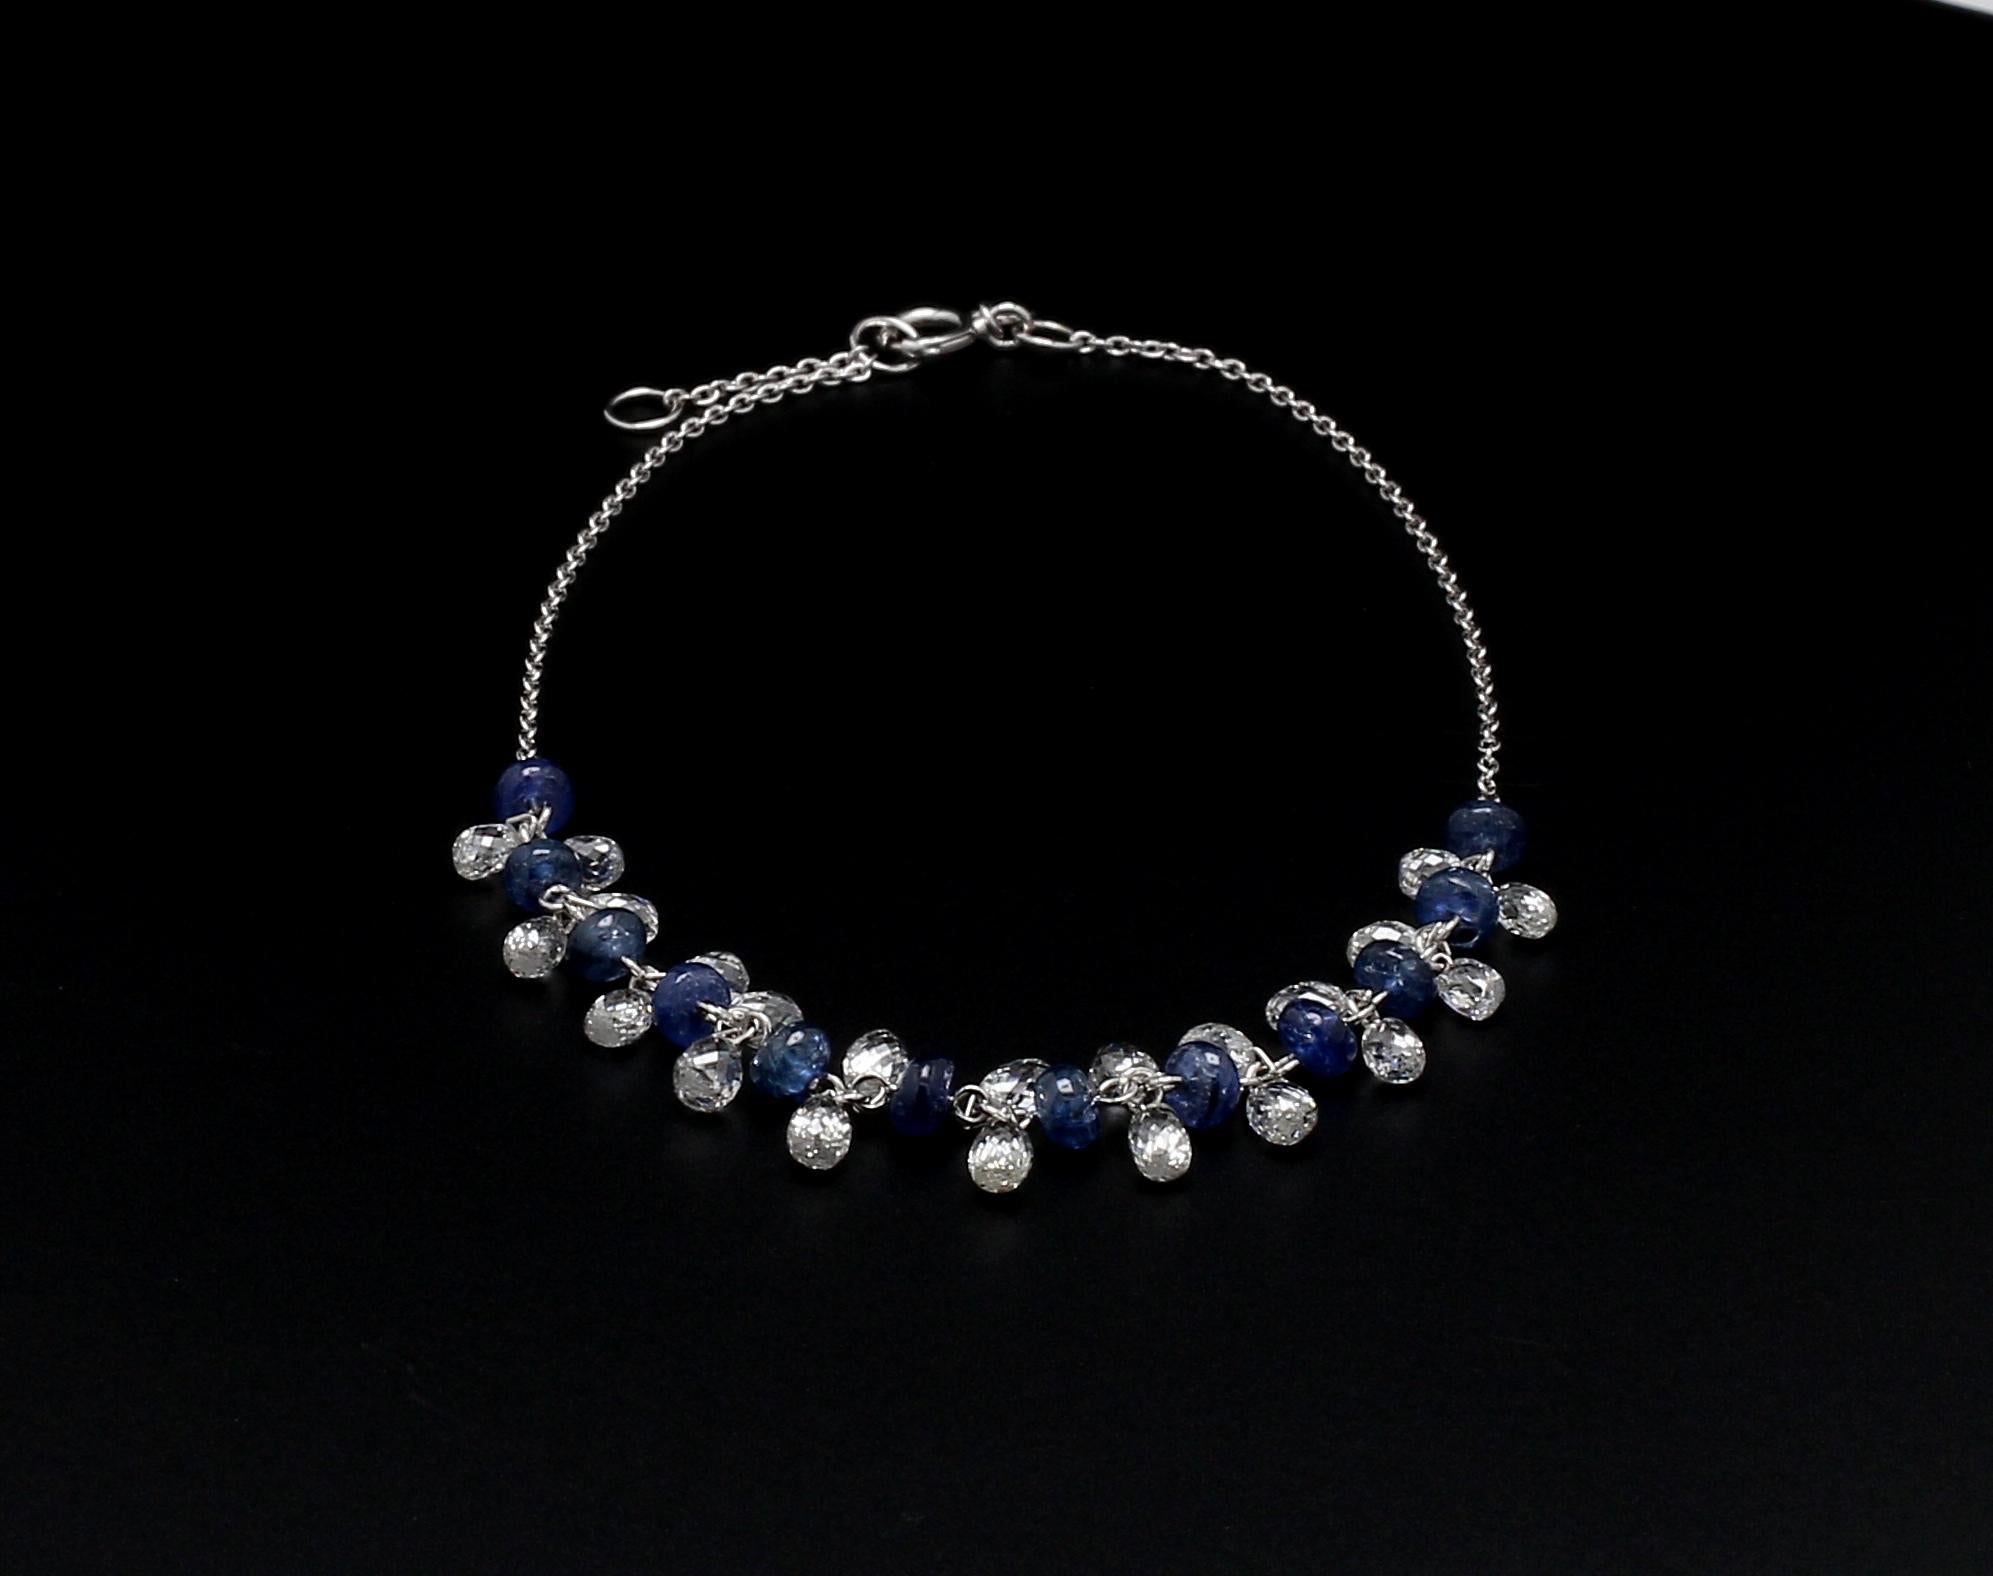 PANIM Briolette Diamond And Sapphire 18K White Gold Dangling Bracelet

Our dangling briolette-cut diamond bracelet is extremely wearable. Its versatility and classic design make it a great accompaniment to various occasions. Beautifully made with